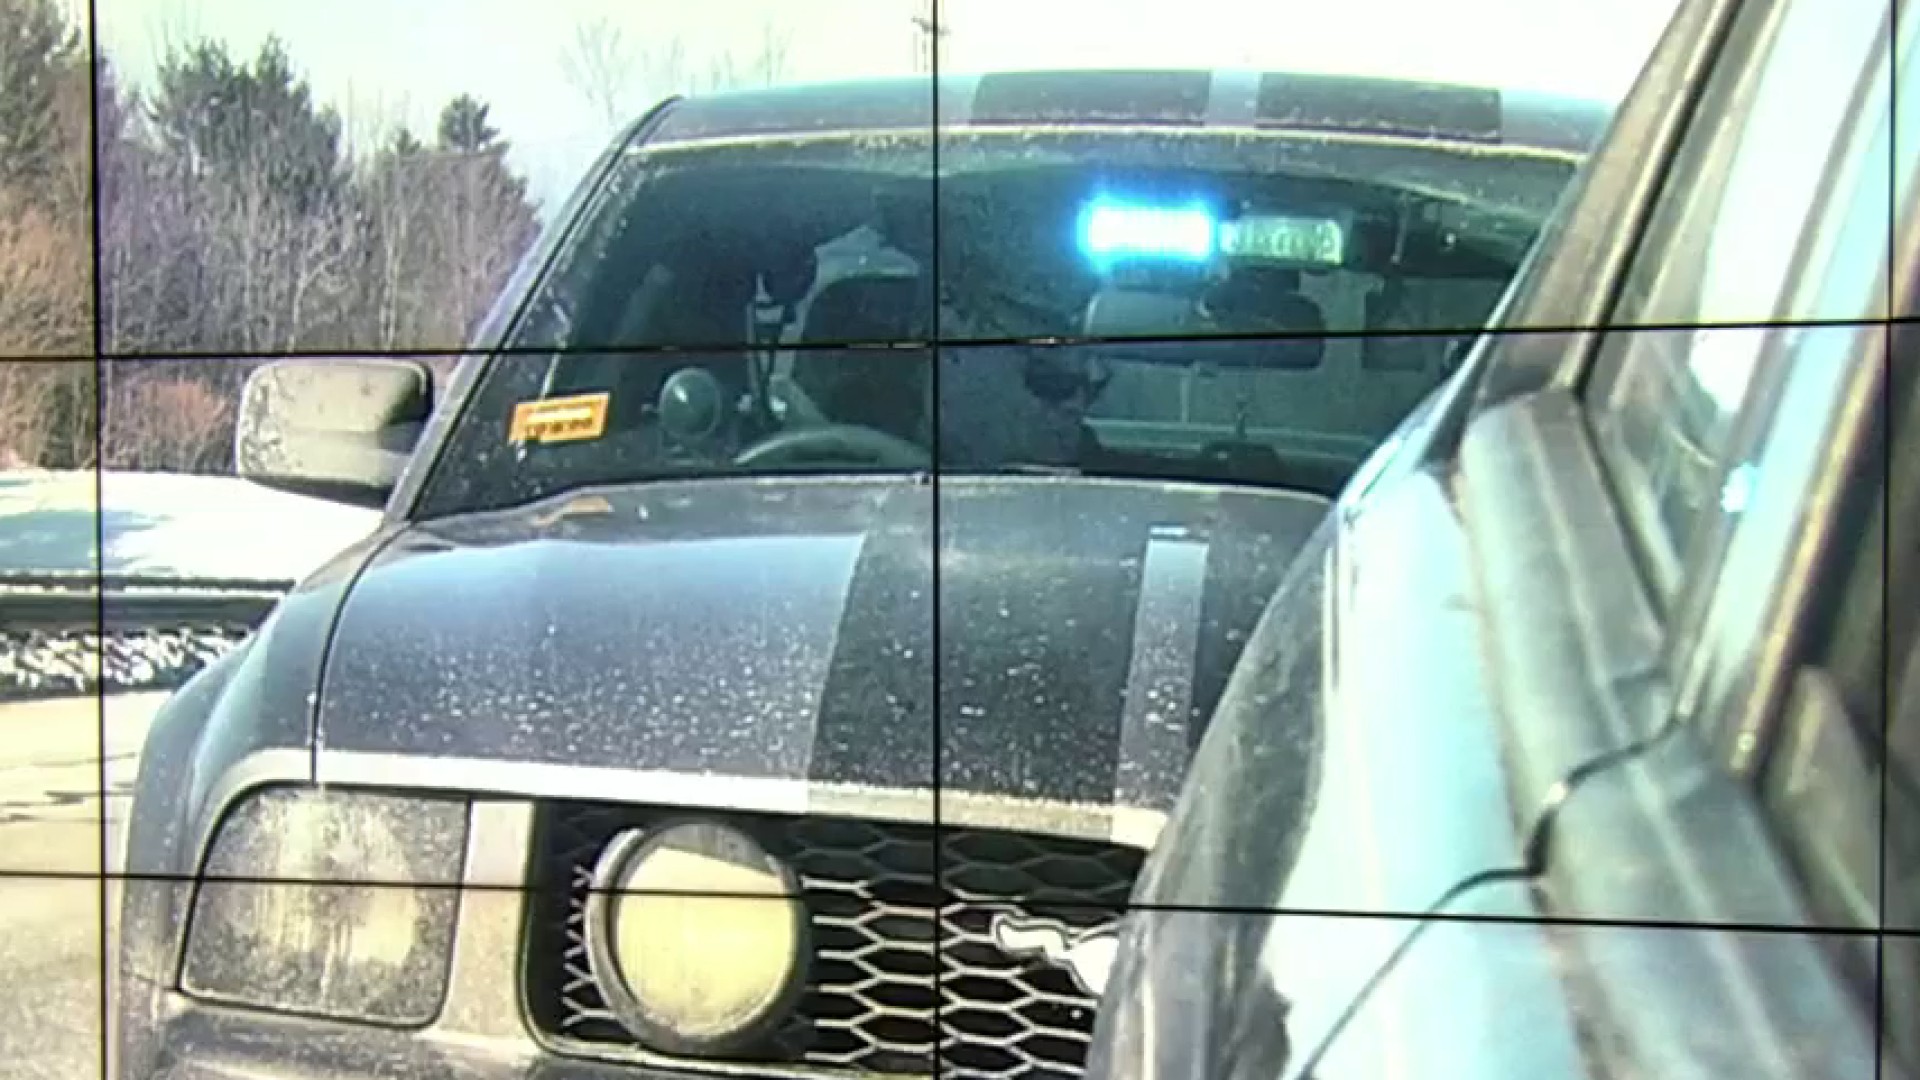 Ask Trooper Steve: How to deal with unmarked vehicles